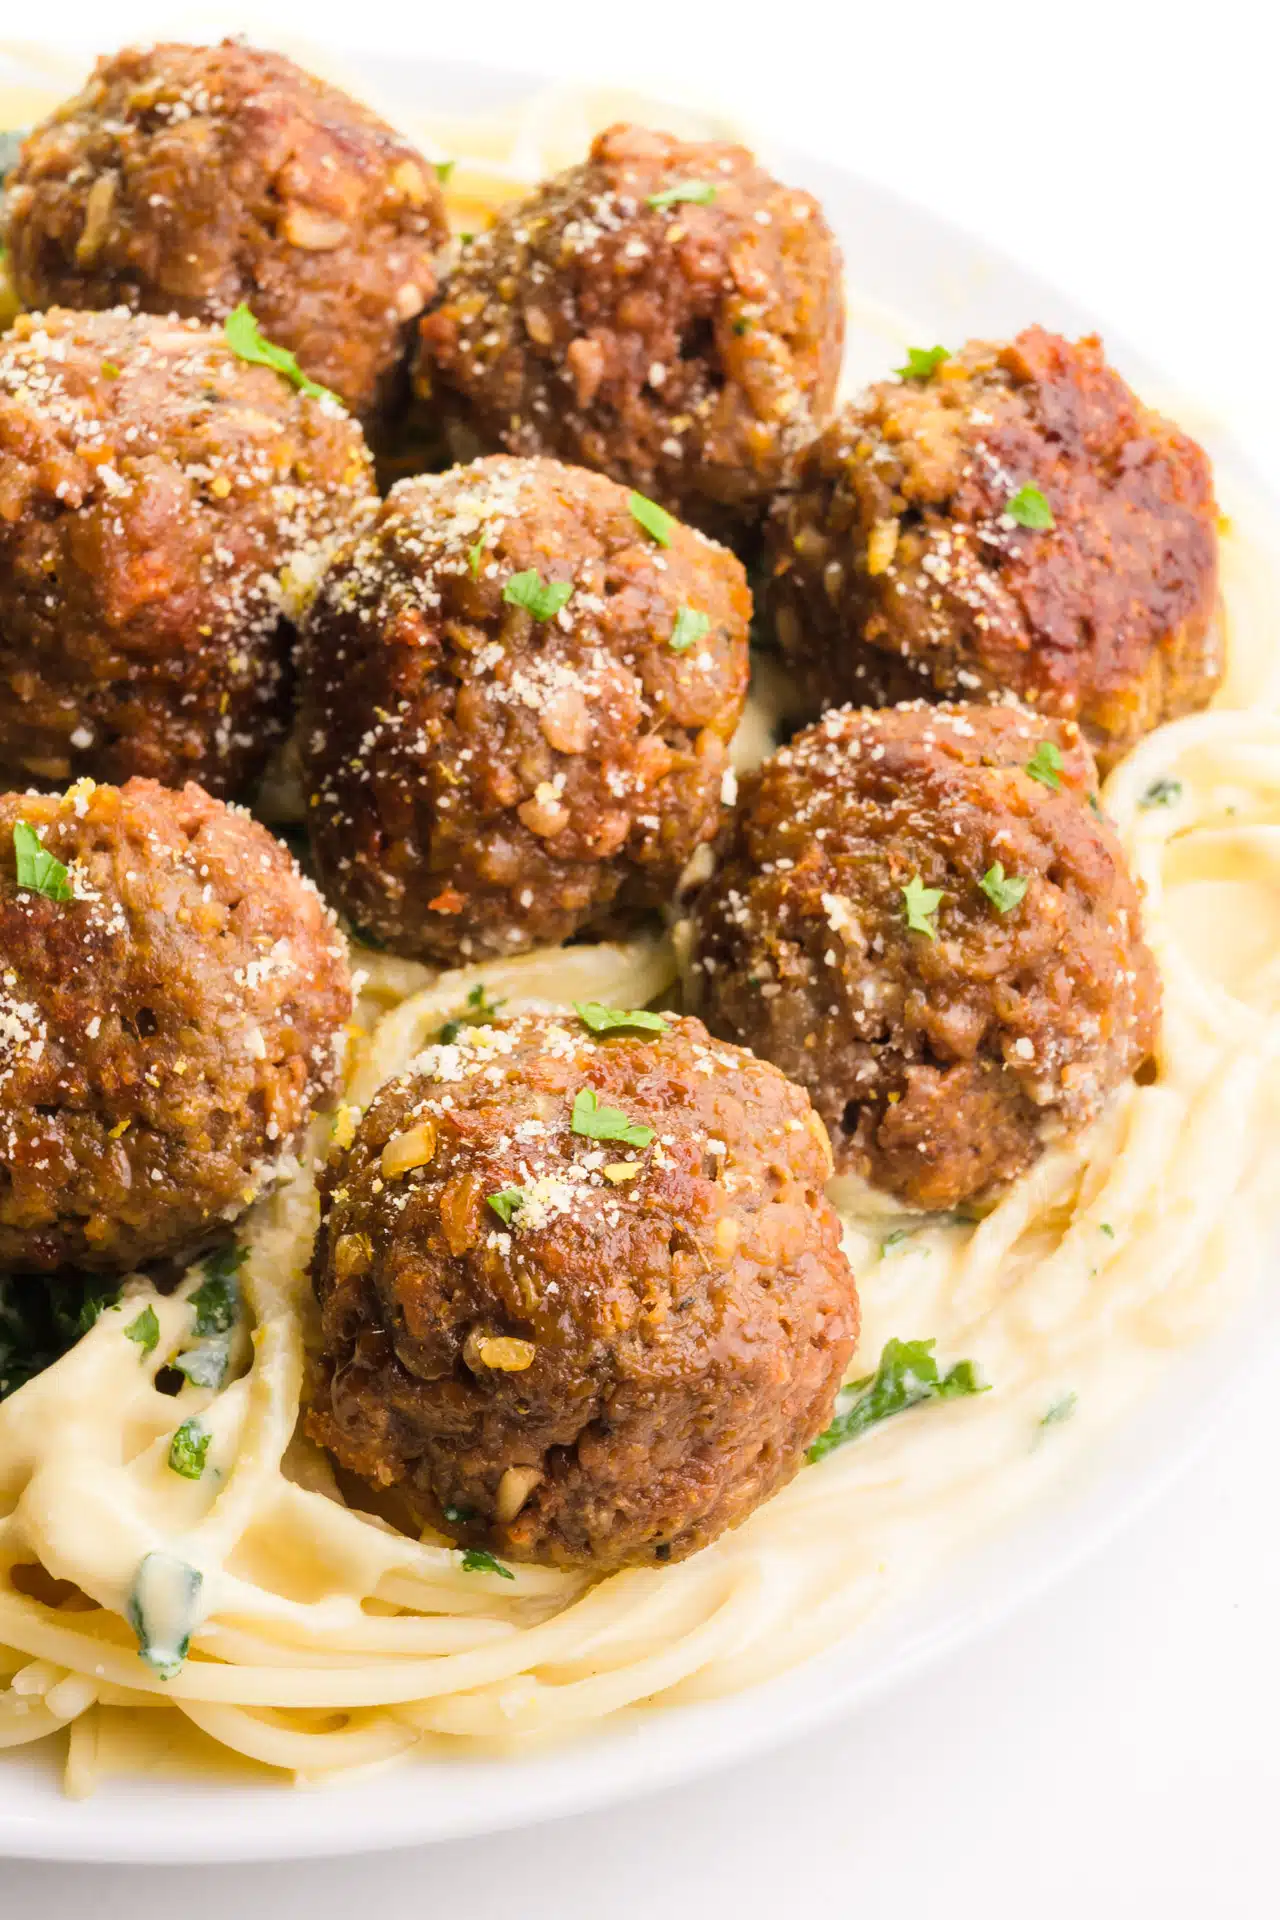 A delectable plate of pasta adorned with creamy sauce, crowned with several succulent Impossible Burger Meatballs. A mouthwatering and indulgent plant-based feast.